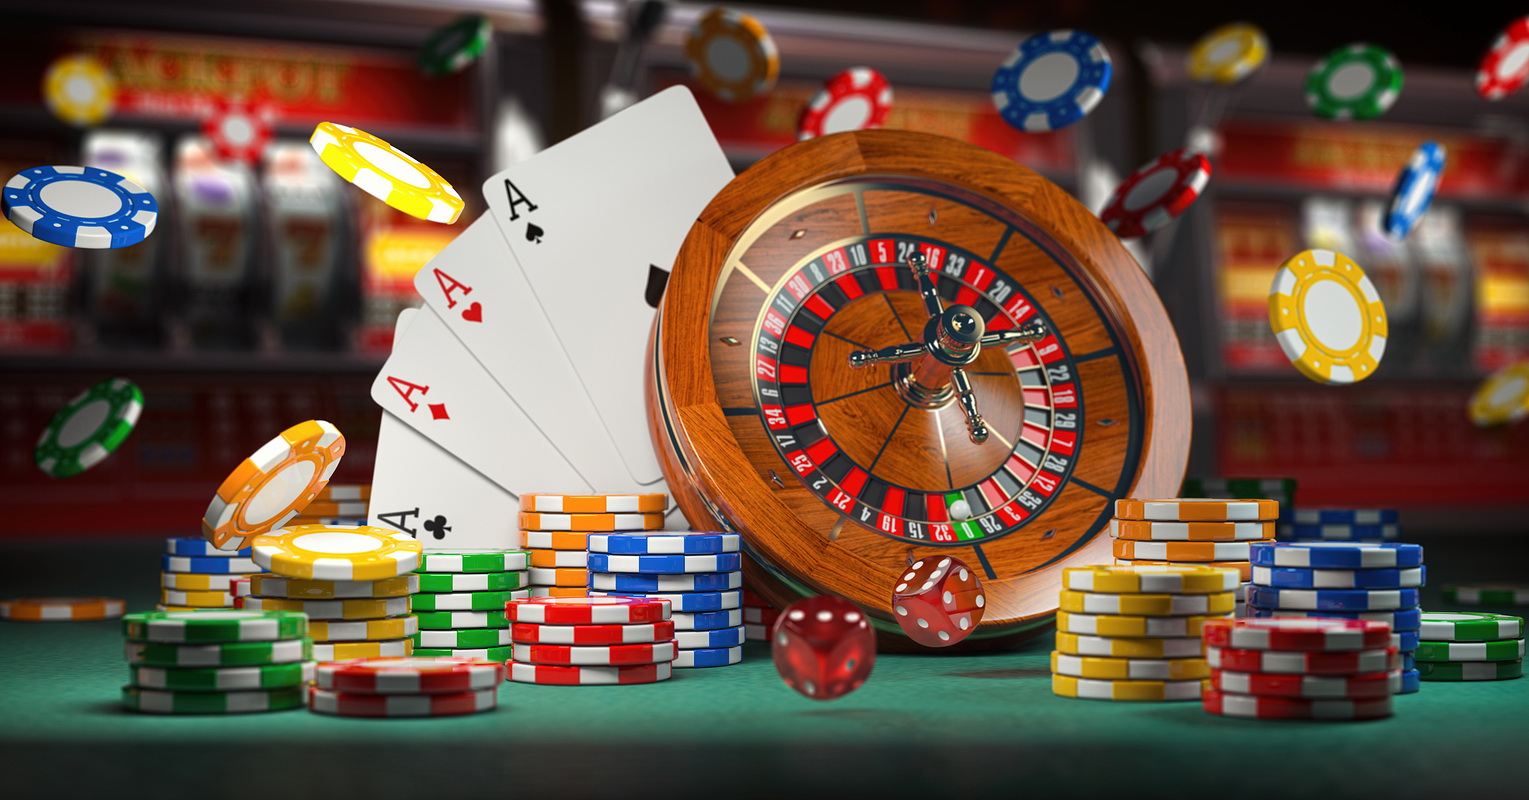 Top 10 Biggest Casinos in the World - 2021 Guide